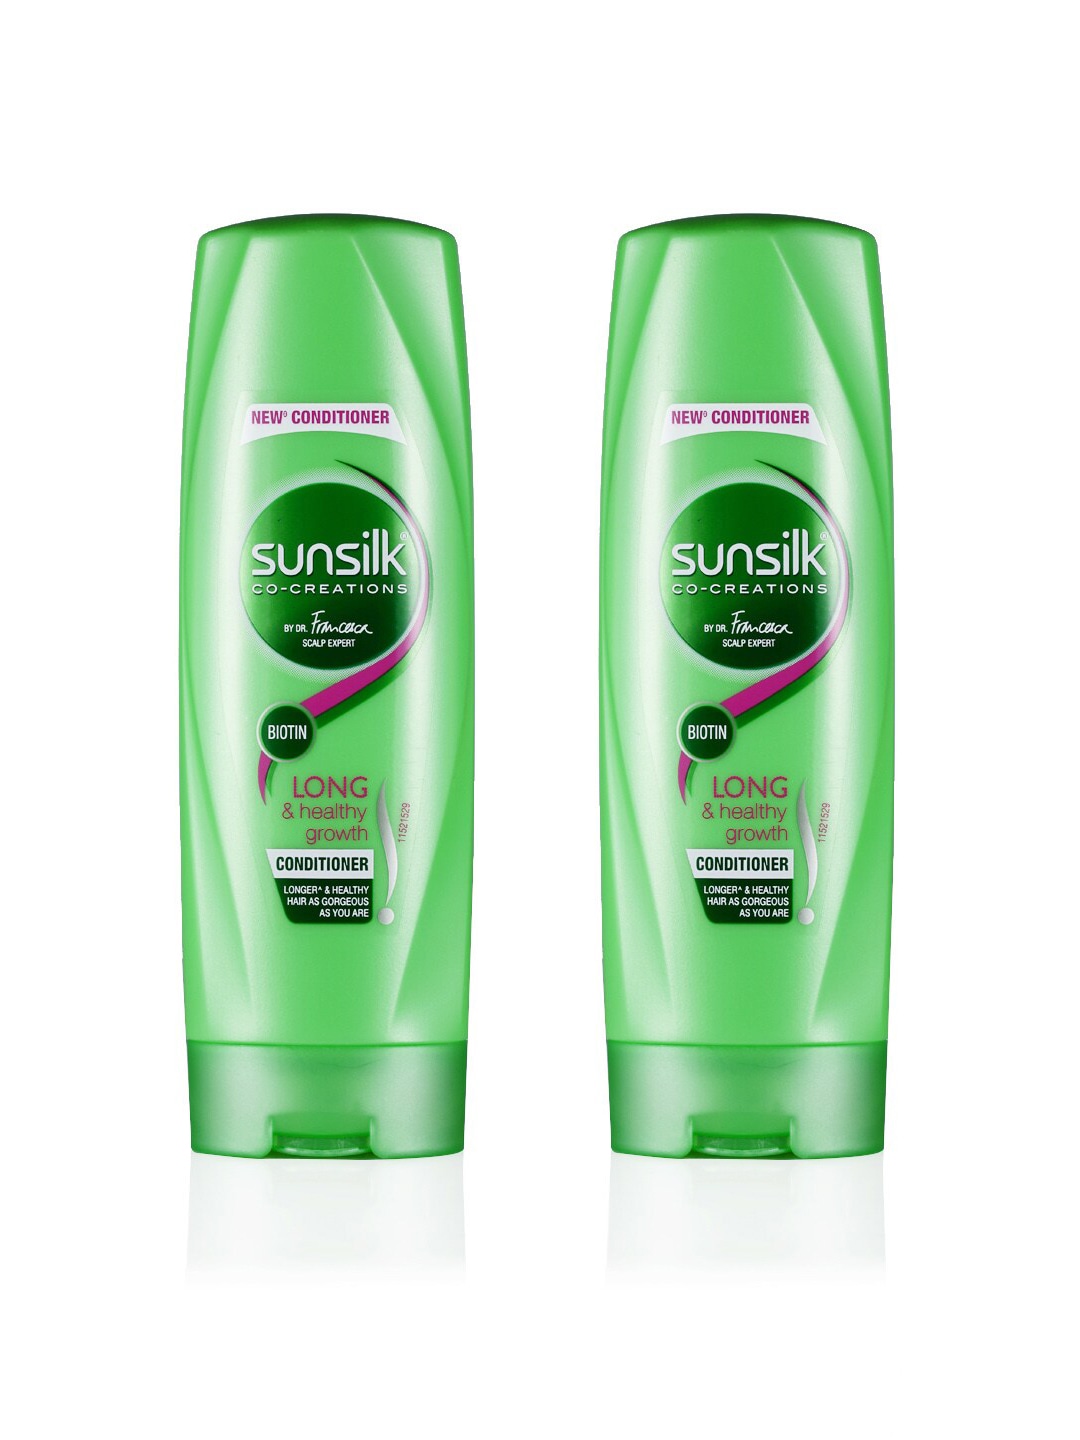 Sunsilk Unisex Set of 2 Long & Healthy Growth Hair Conditioner (180 ml each) Price in India